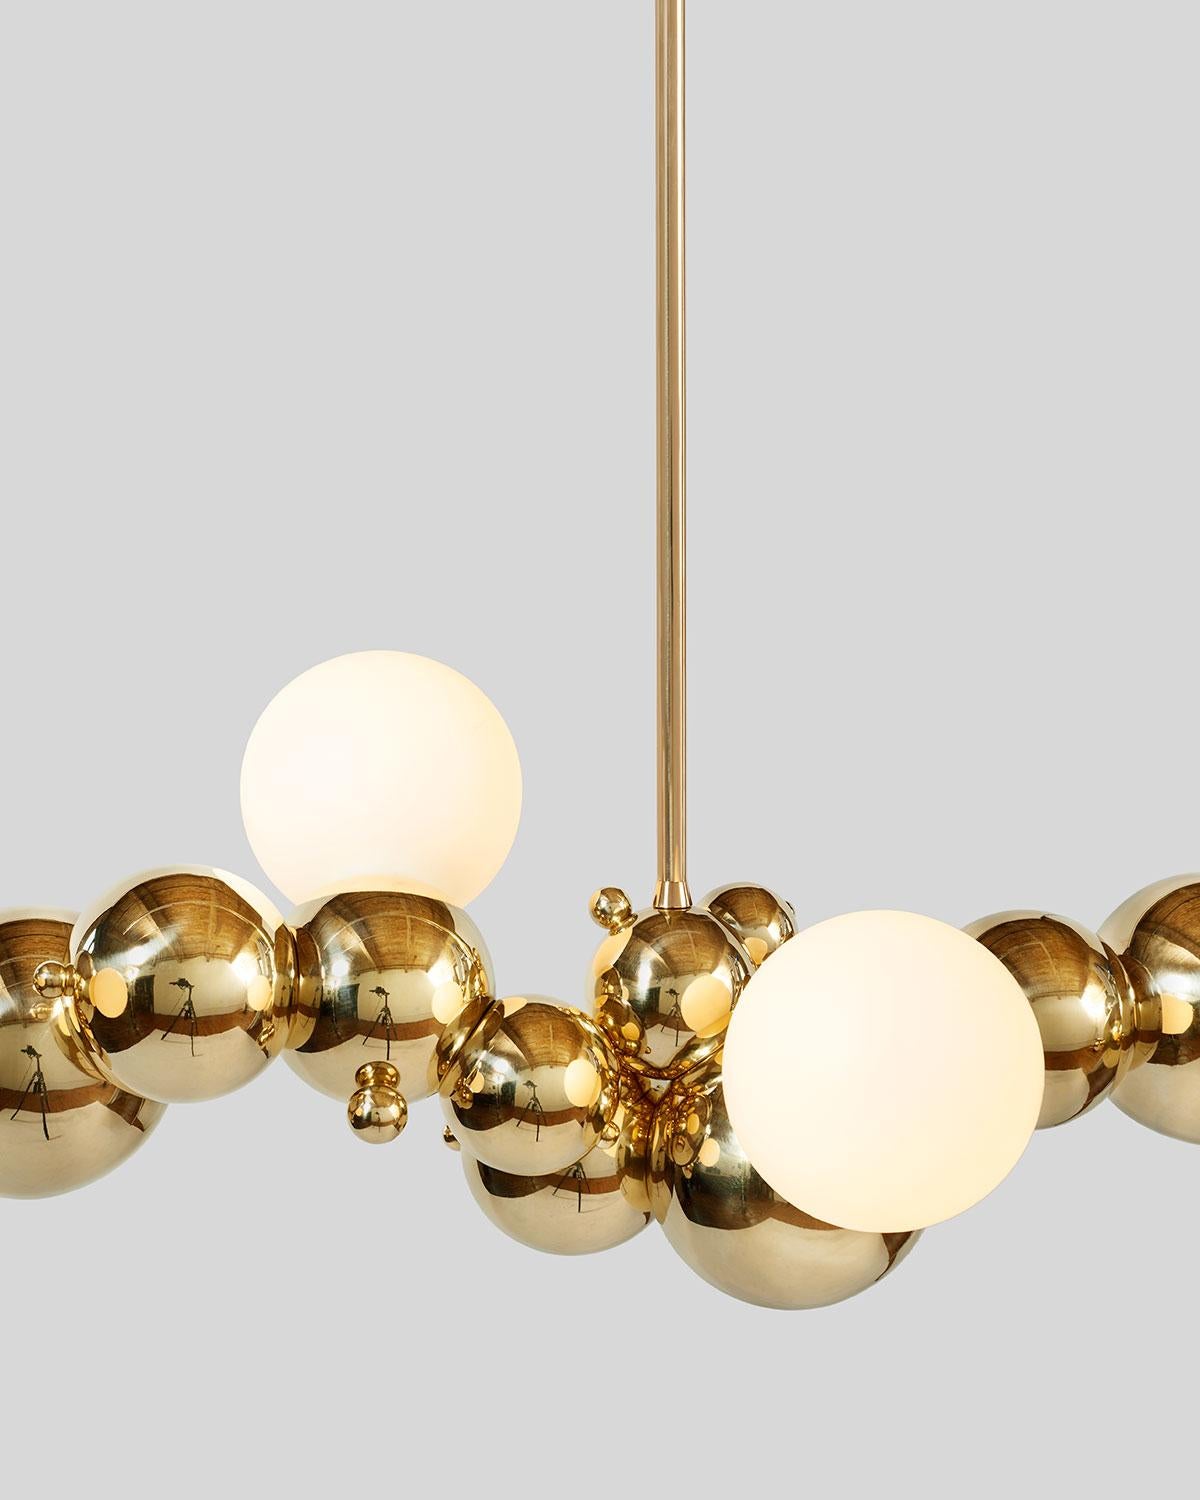 Large, organic chandelier with four lights made of interlocking spun brass spheres, from Rosie Li's 